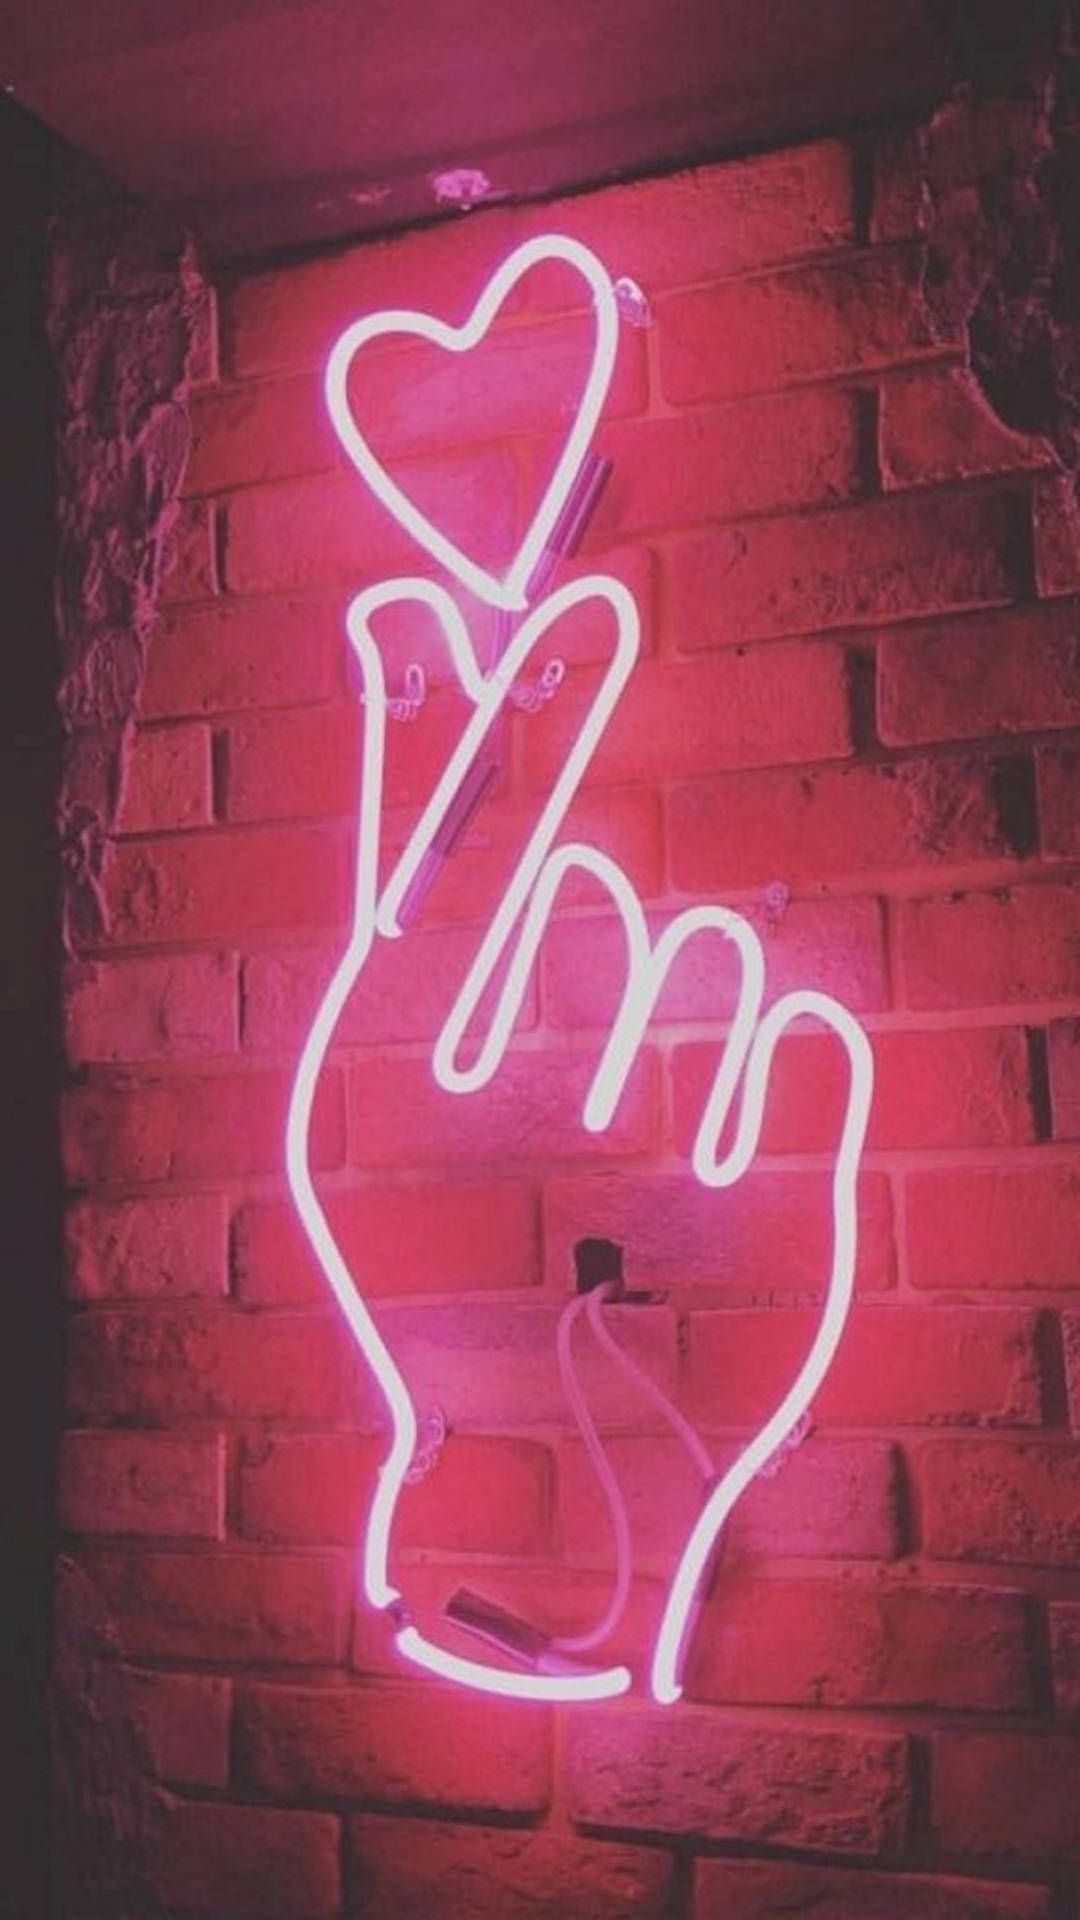 A neon sign that says love on it - Hot pink, neon pink